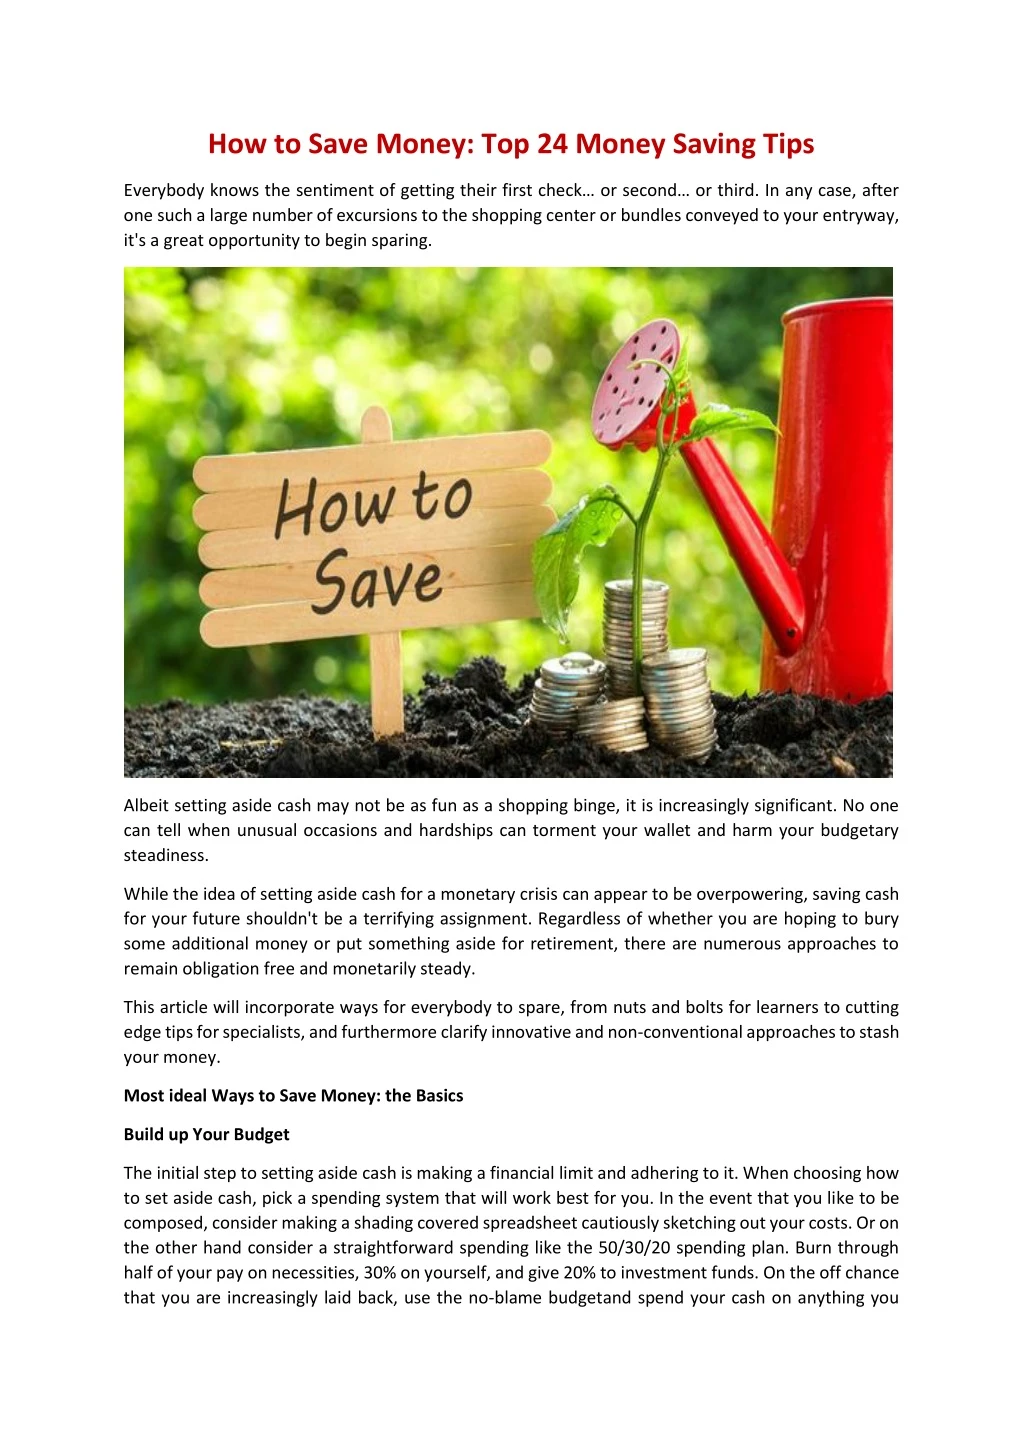 how to save money top 24 money saving tips